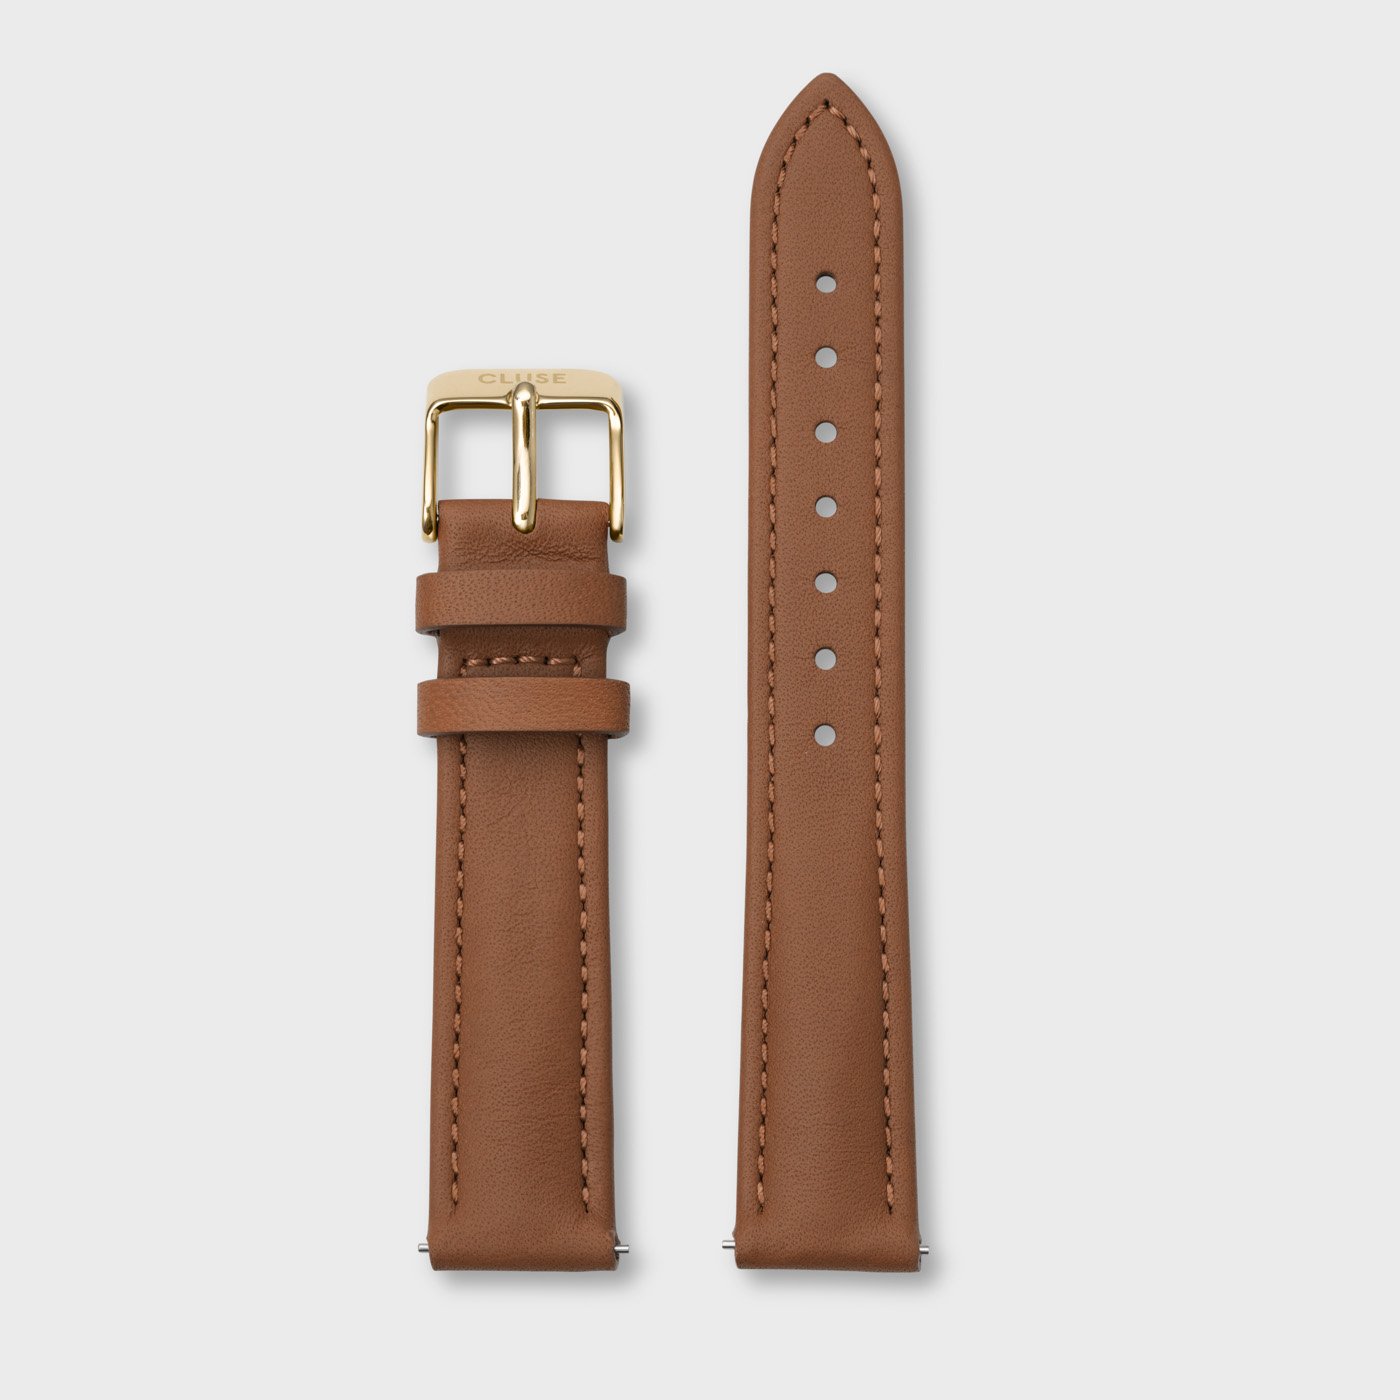 Strap 16 mm Leather Caramel, Gold Colour